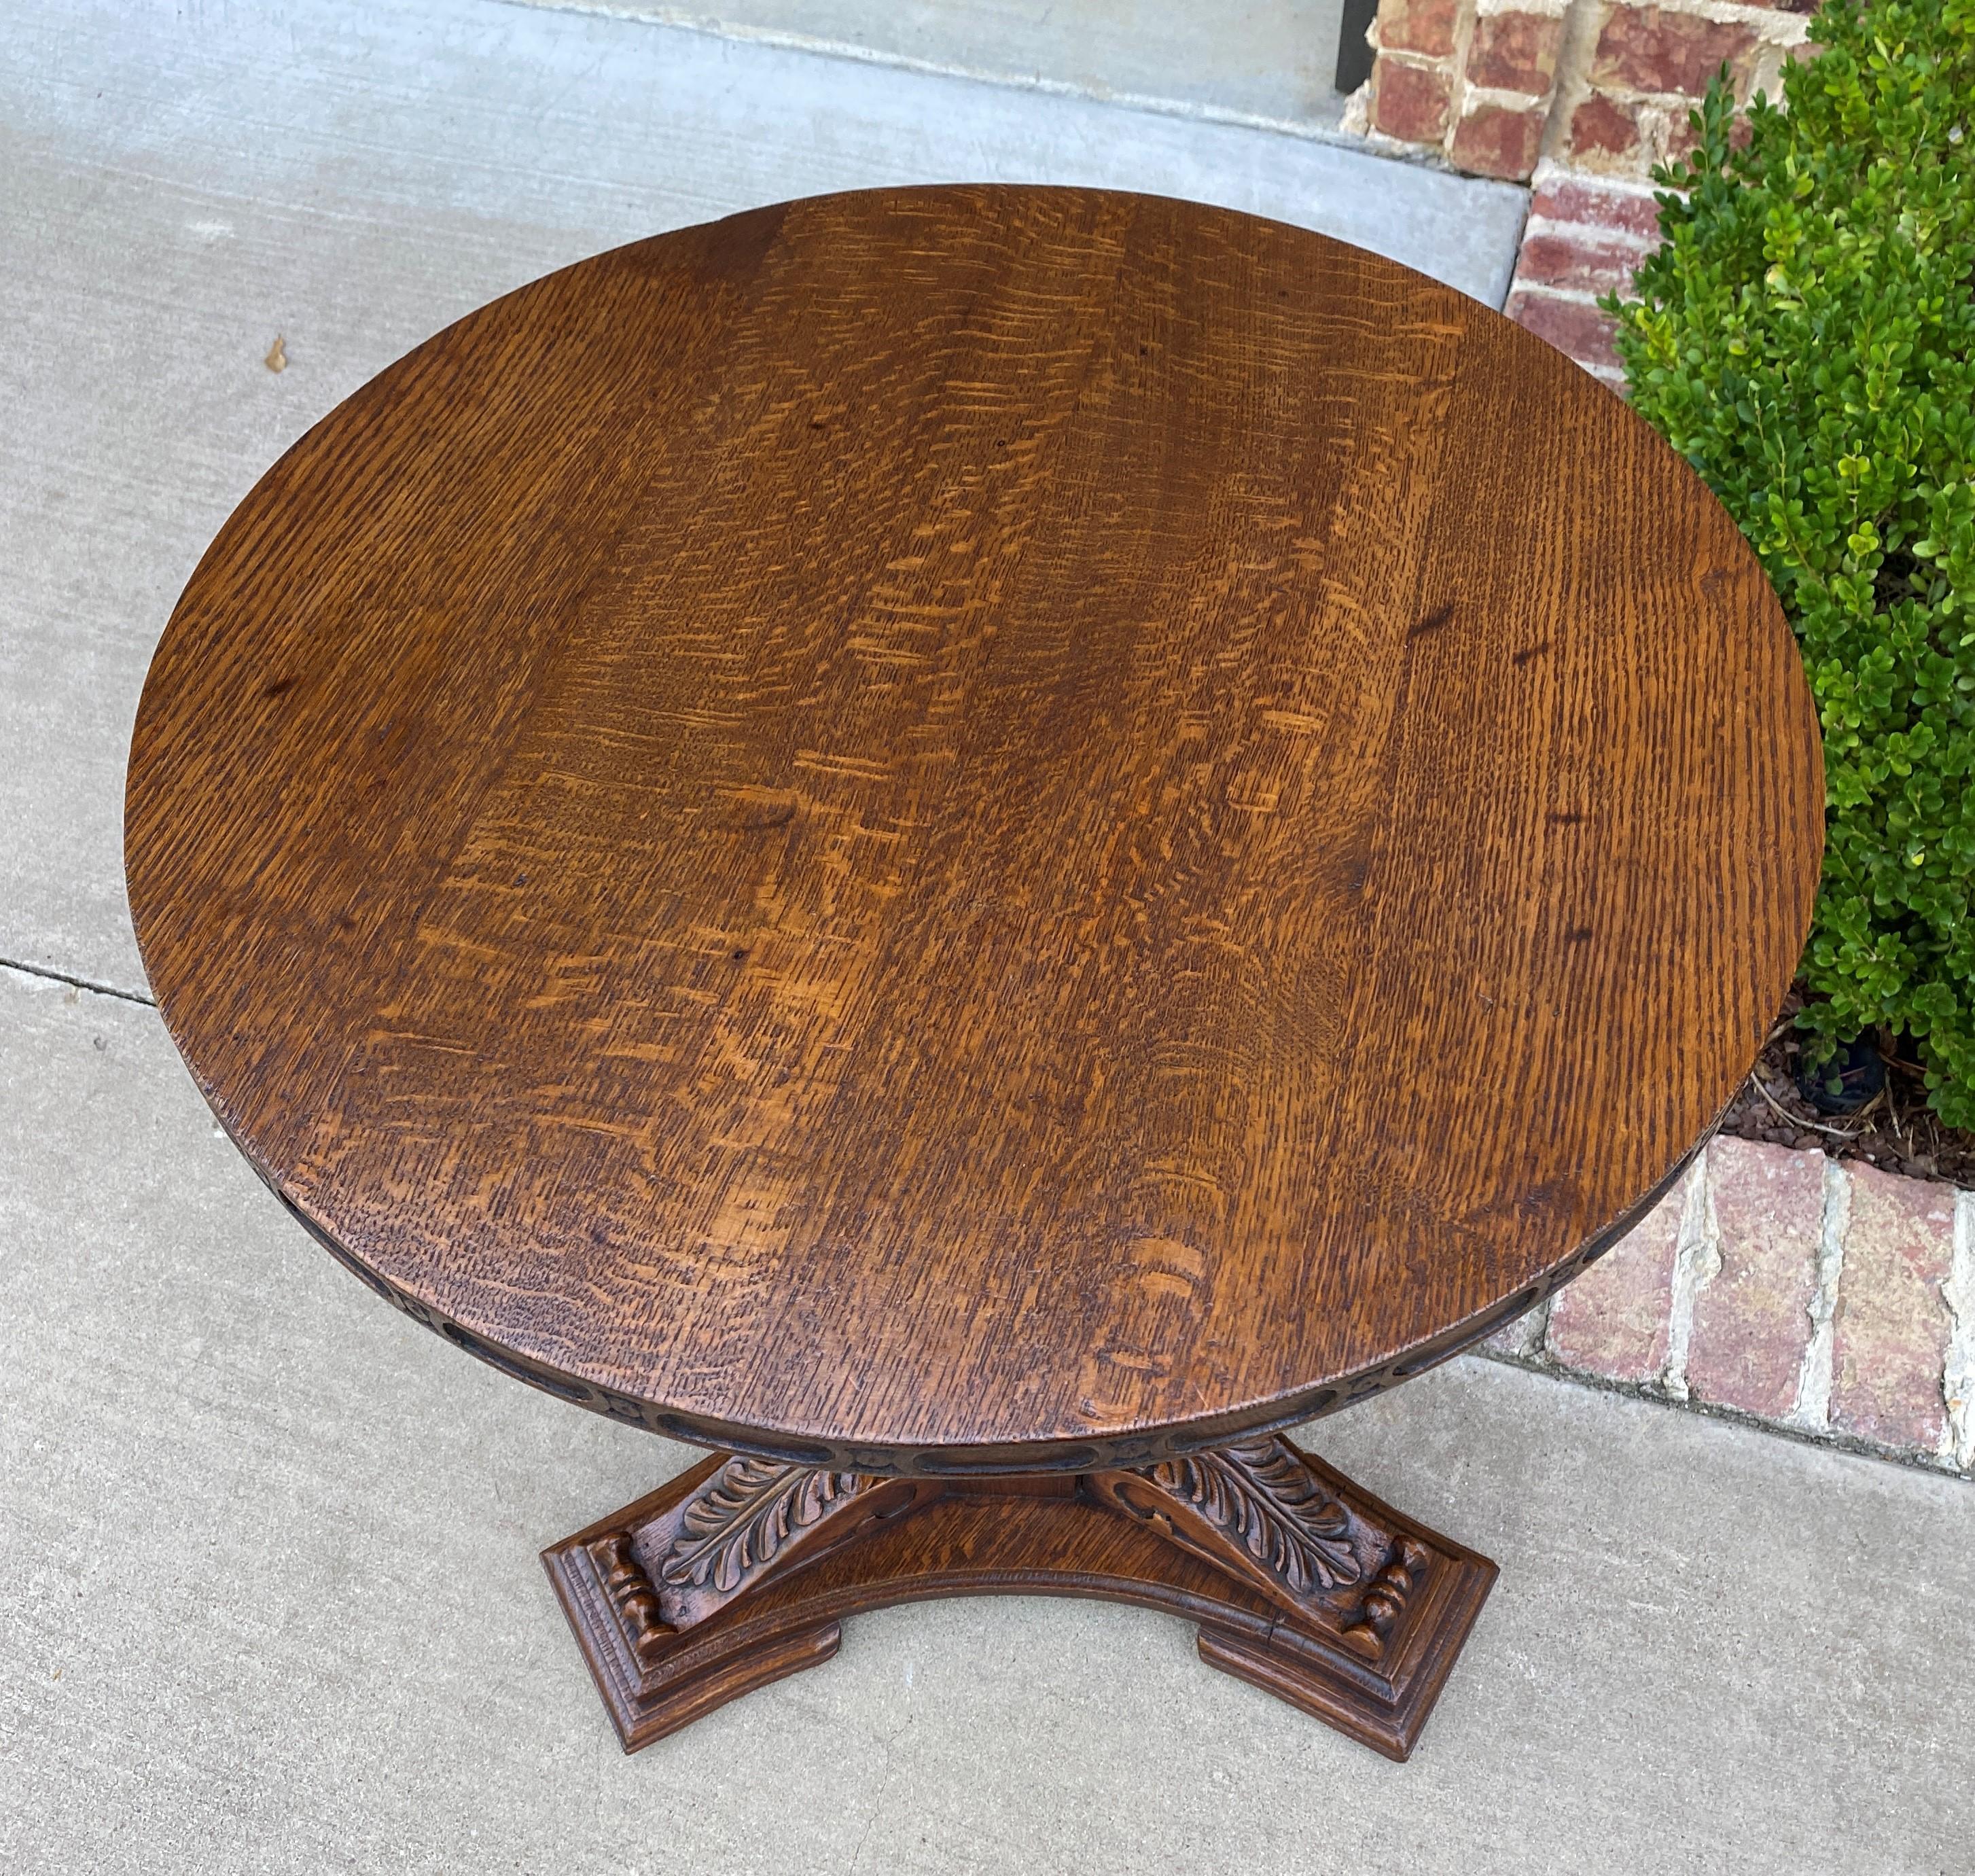 Renaissance Revival Antique English Round Table Pedestal End Occasional Table Nightstand Carved Oak